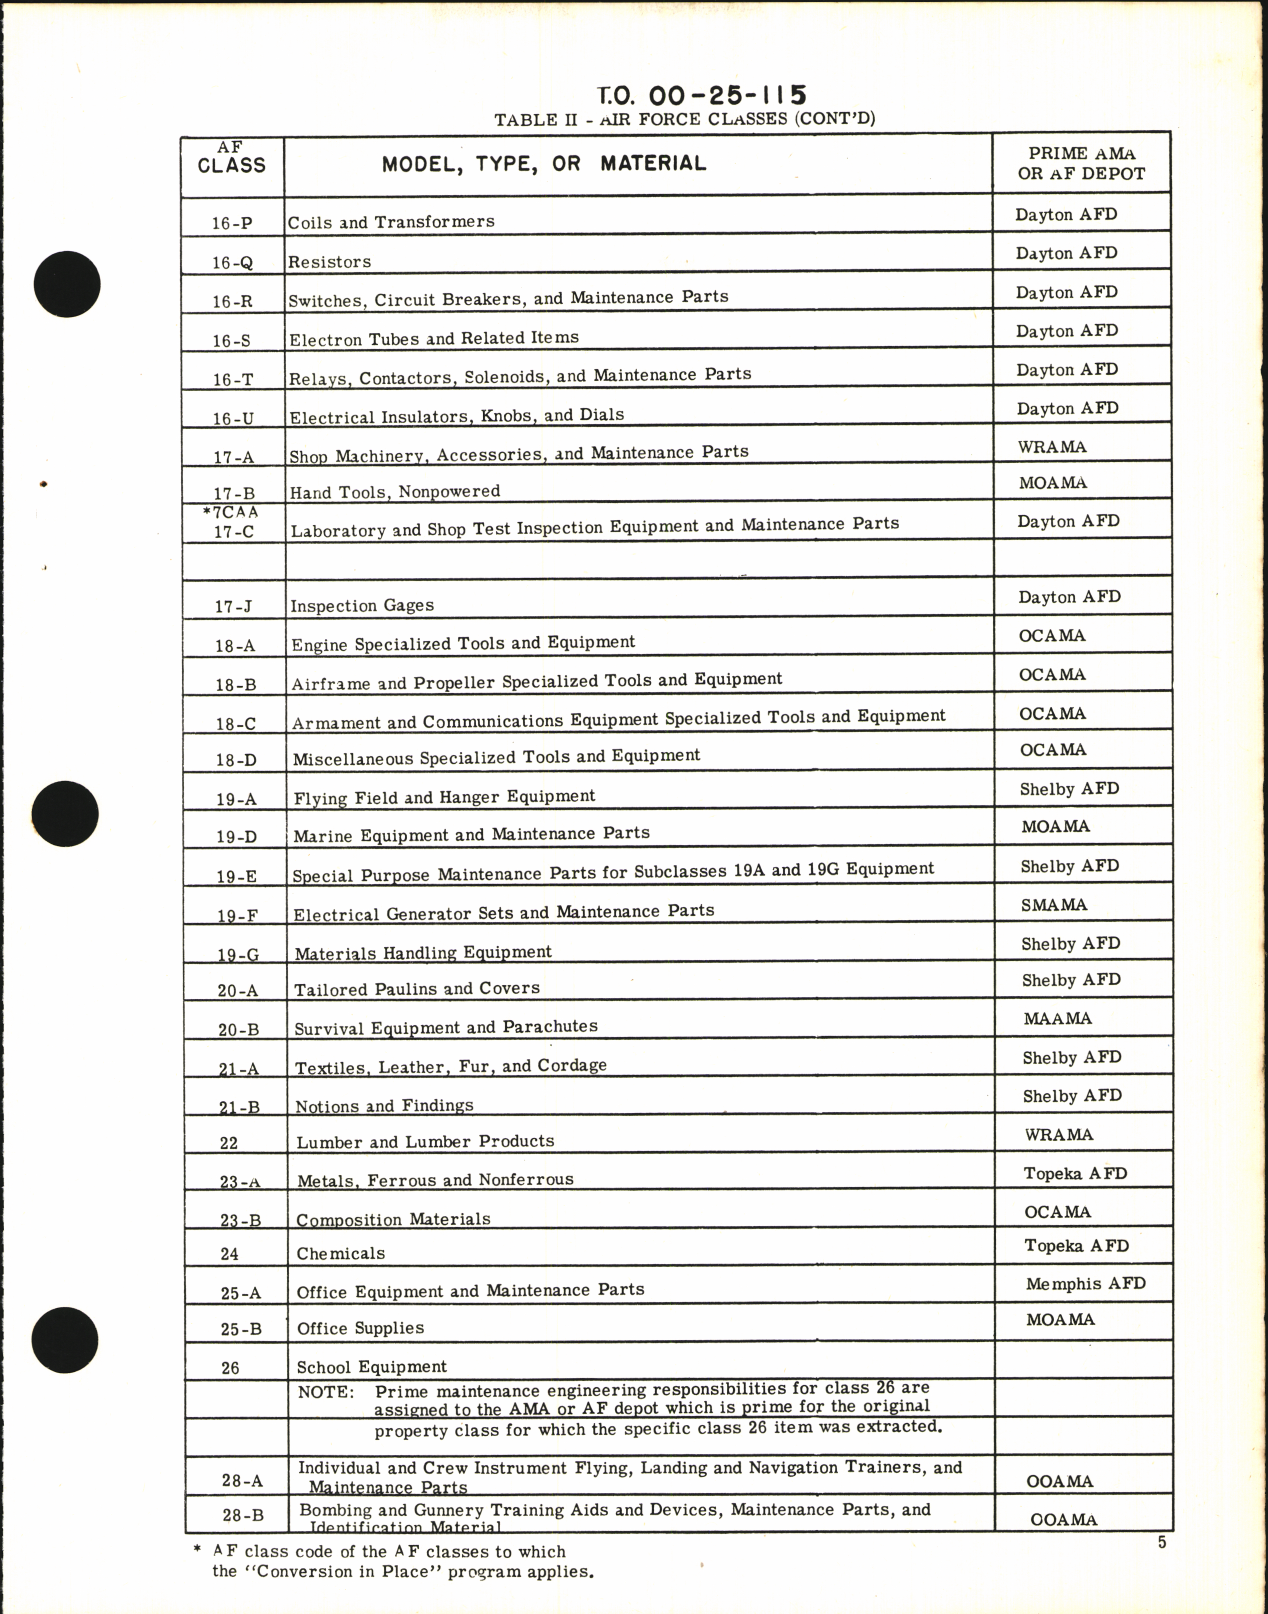 Sample page 7 from AirCorps Library document: Designation of AMC Maintenance Engineering 